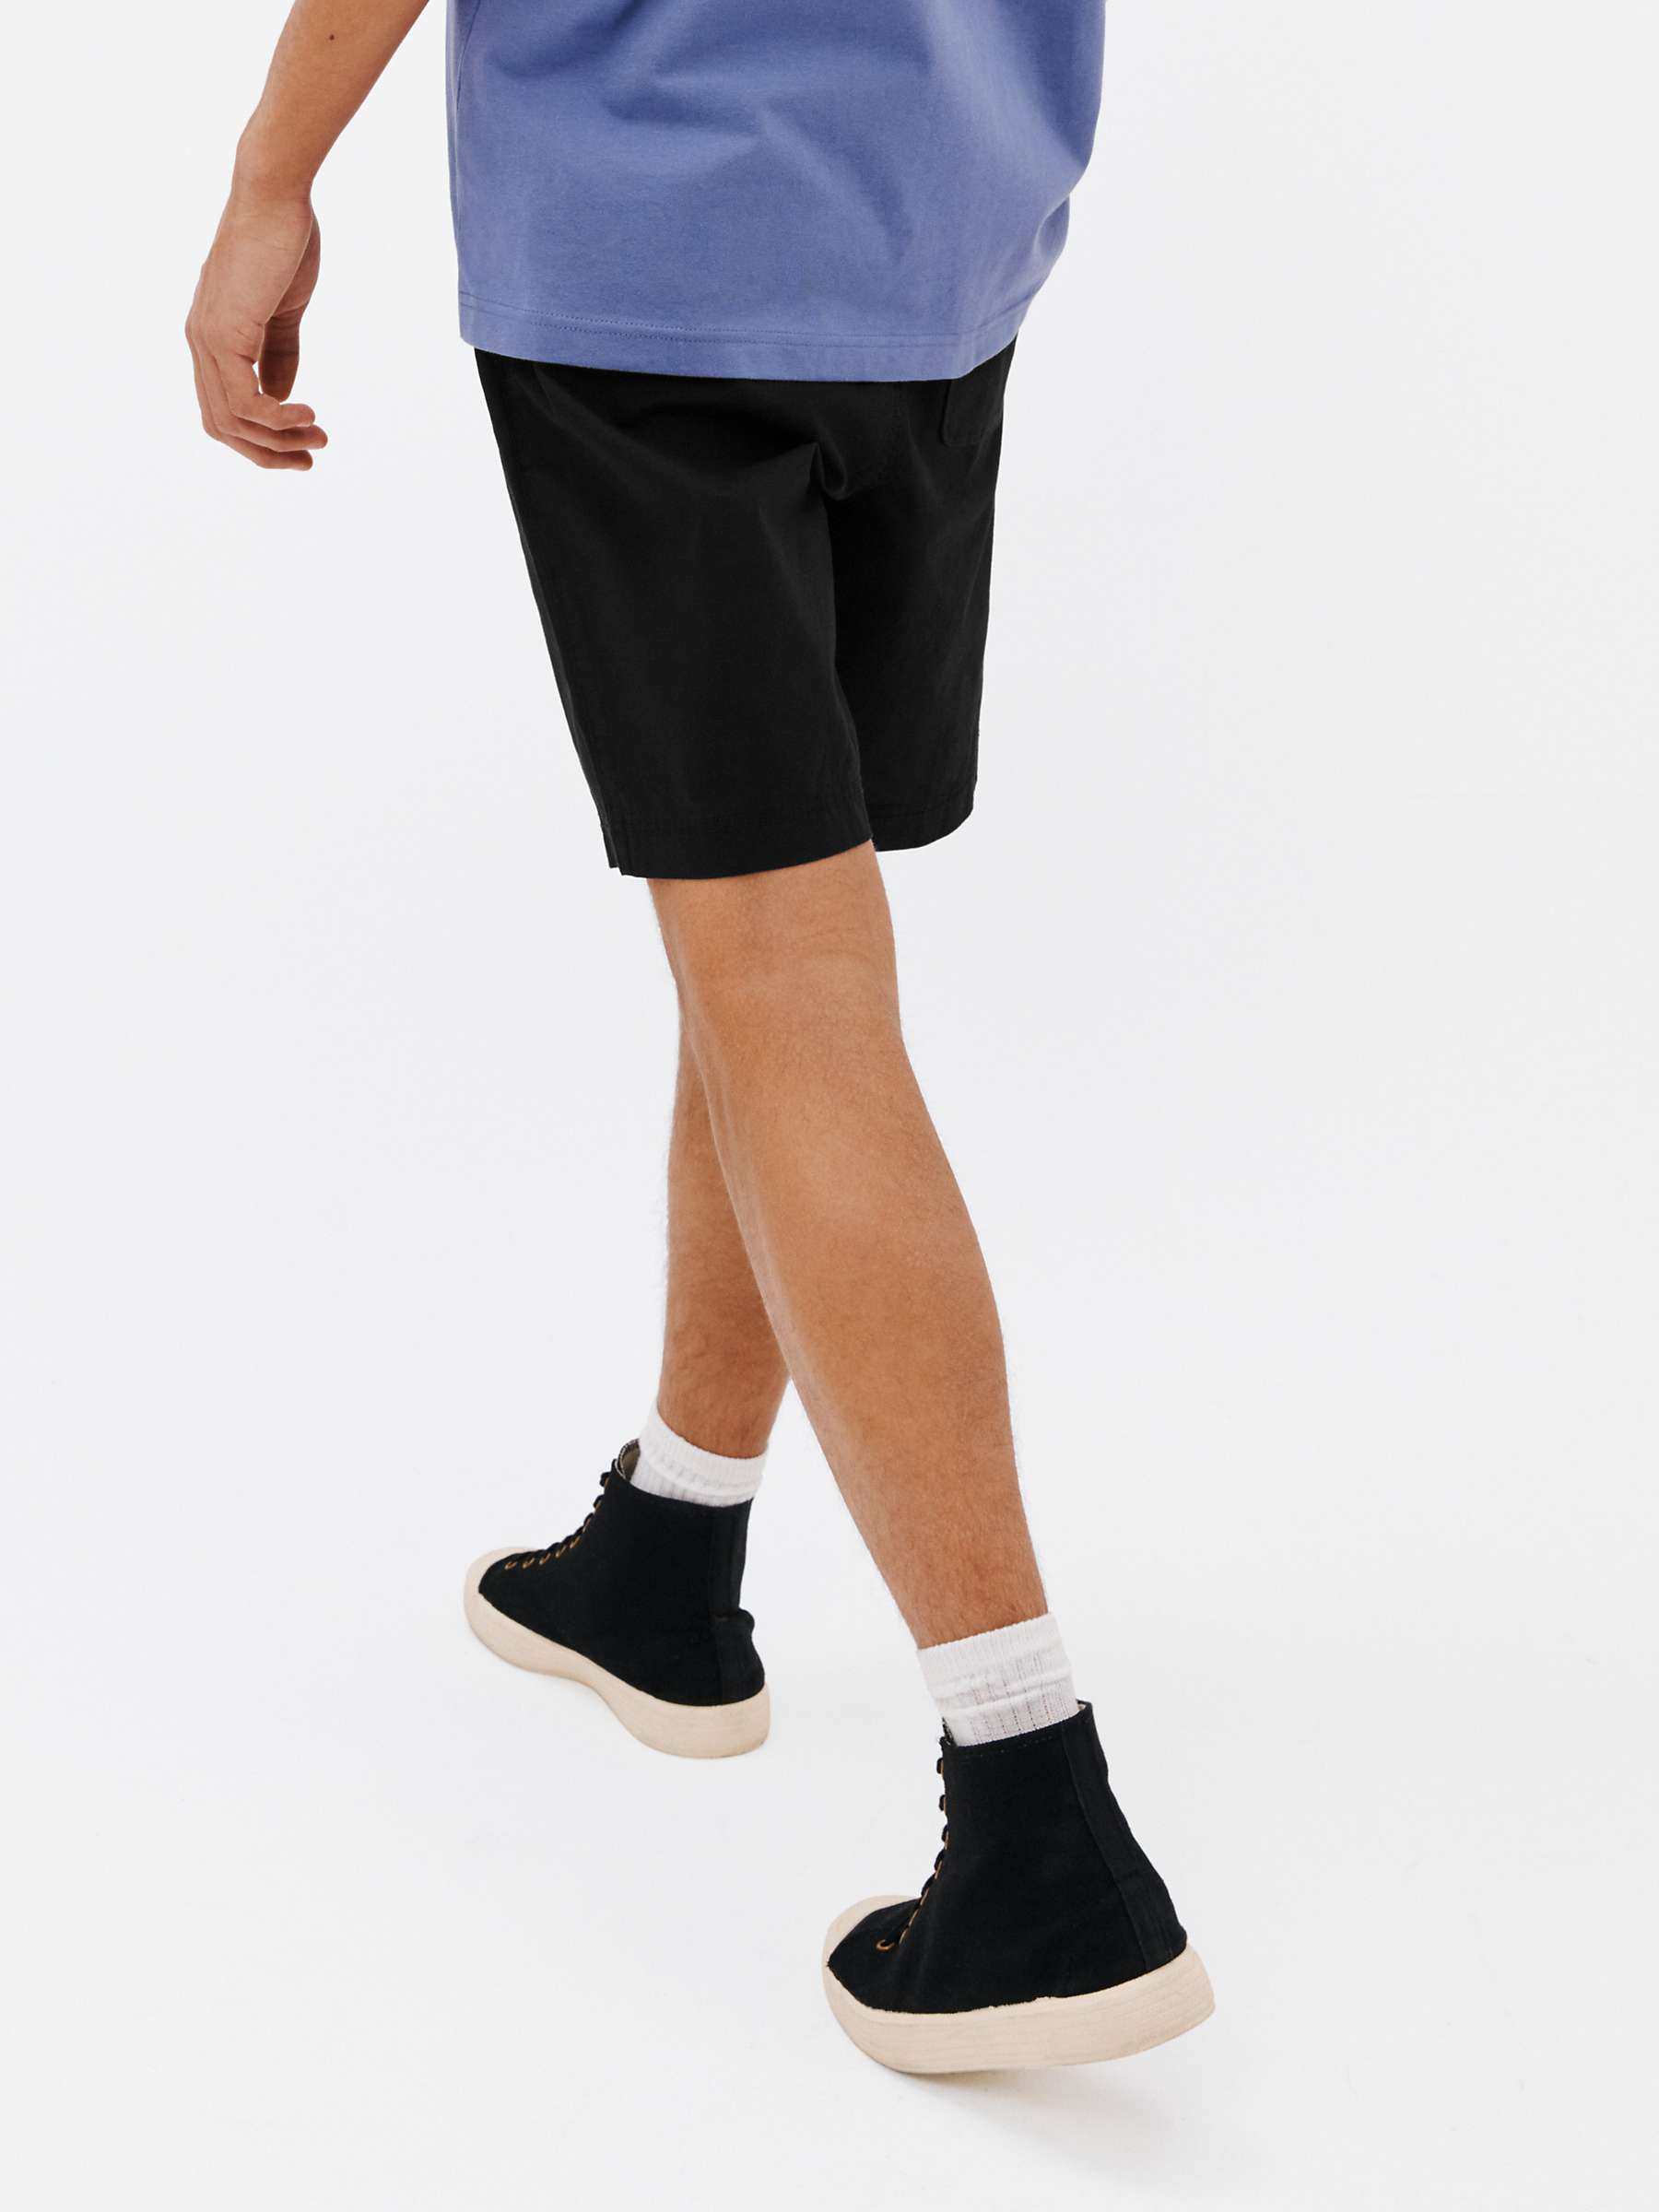 Buy John Lewis ANYDAY Cotton Ripstop Shorts Online at johnlewis.com